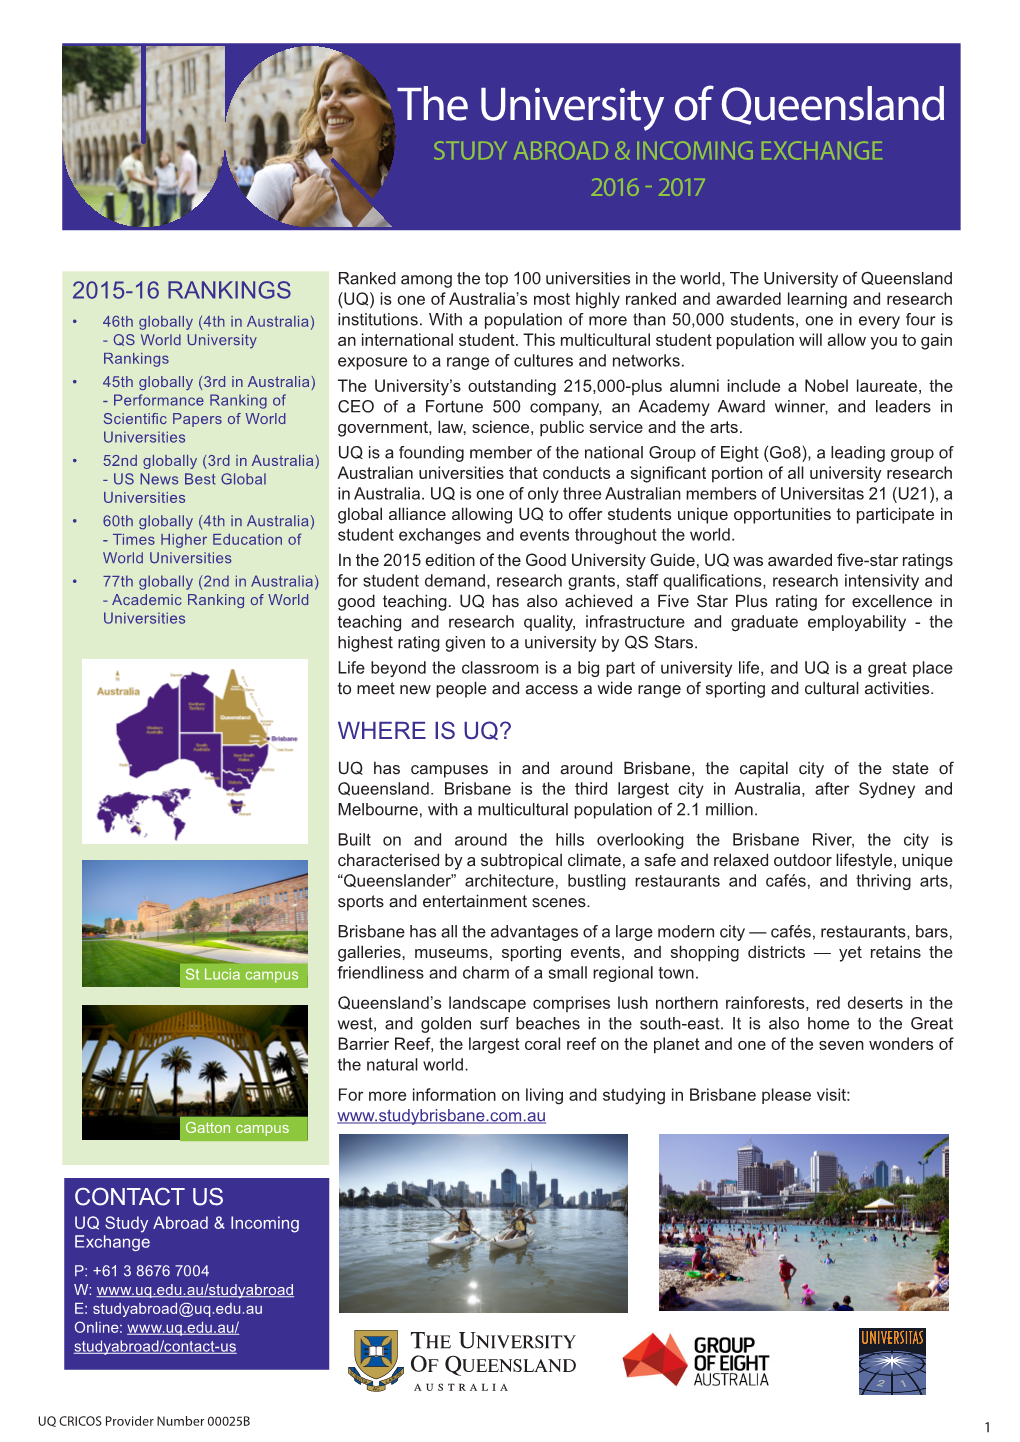 The University of Queensland STUDY ABROAD & INCOMING EXCHANGE 2016 - 2017